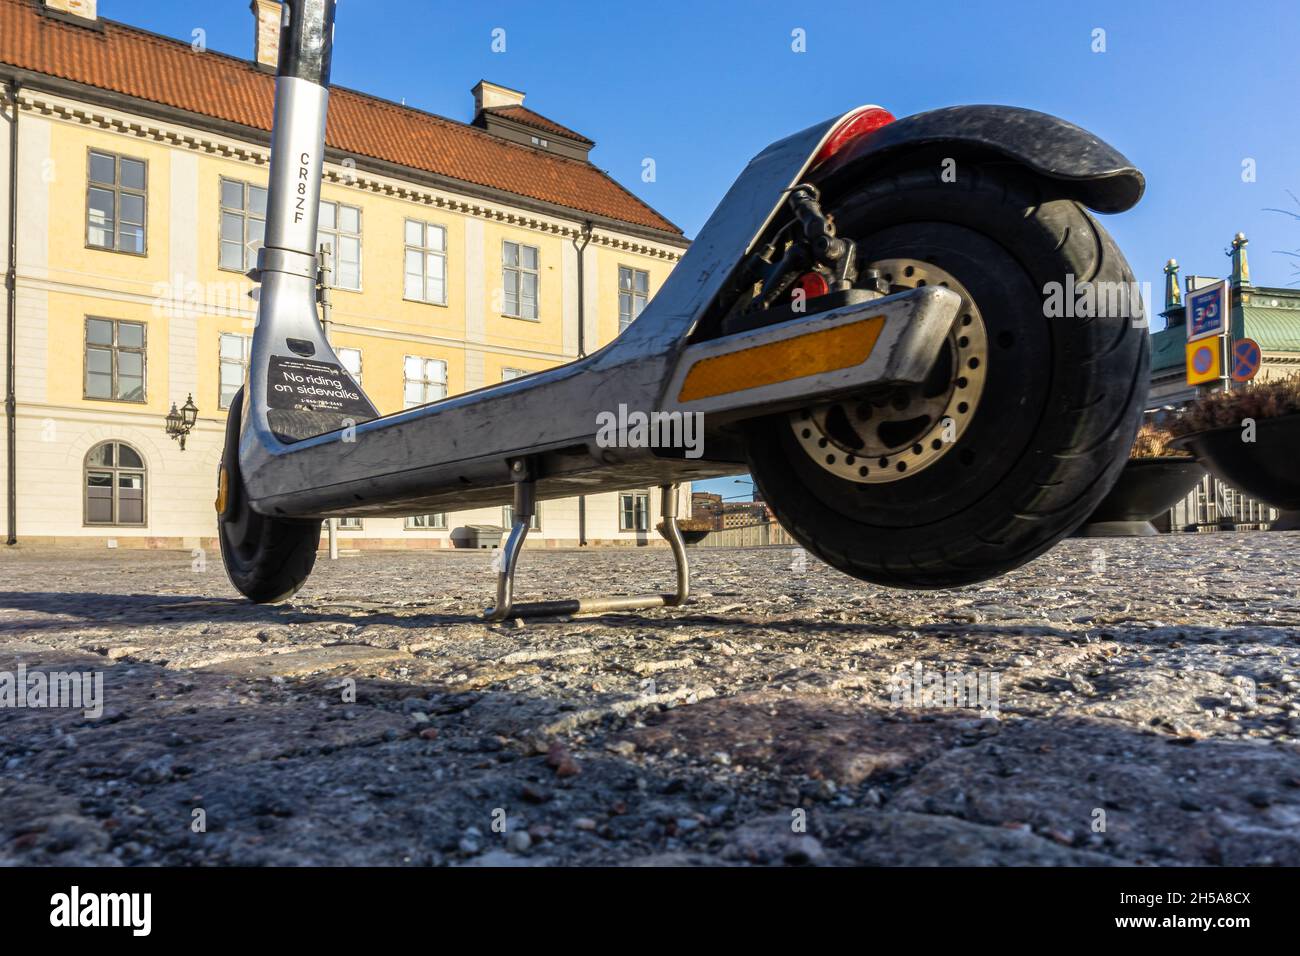 Stockholm, Sweden - April 3, 2021: Close up of tires and electrical rent-a-scooter as a part of transportation offer in Stockholm Stock Photo